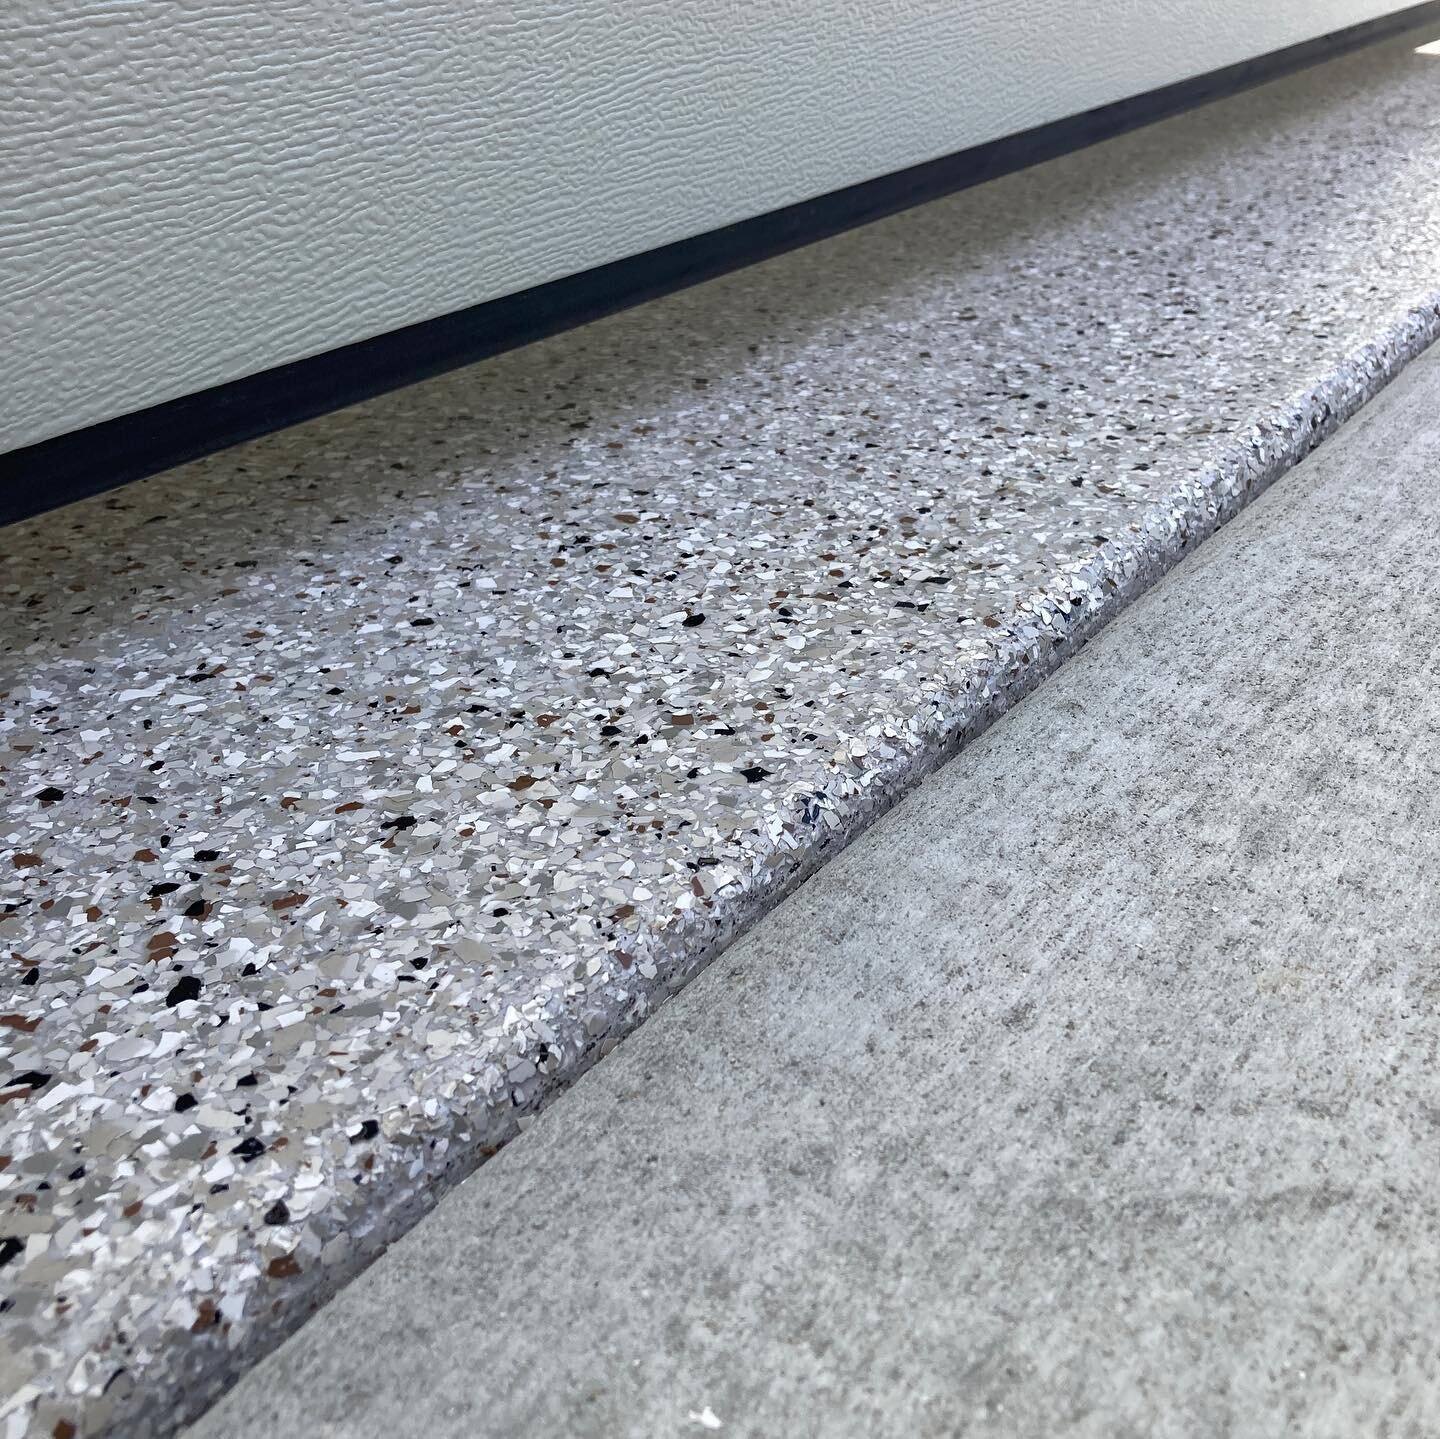 😎 Just wrapped up another custom concrete coating just in time for spring!

👉Flake Epoxy System✨
👉Color: Dakota Grey
👉Strong, durable &amp; clean

📱call/text: 208-402-8386

#epoxyfloor #epoxyflooring #garagefloor #epoxyfloorsidaho #garagetransfo